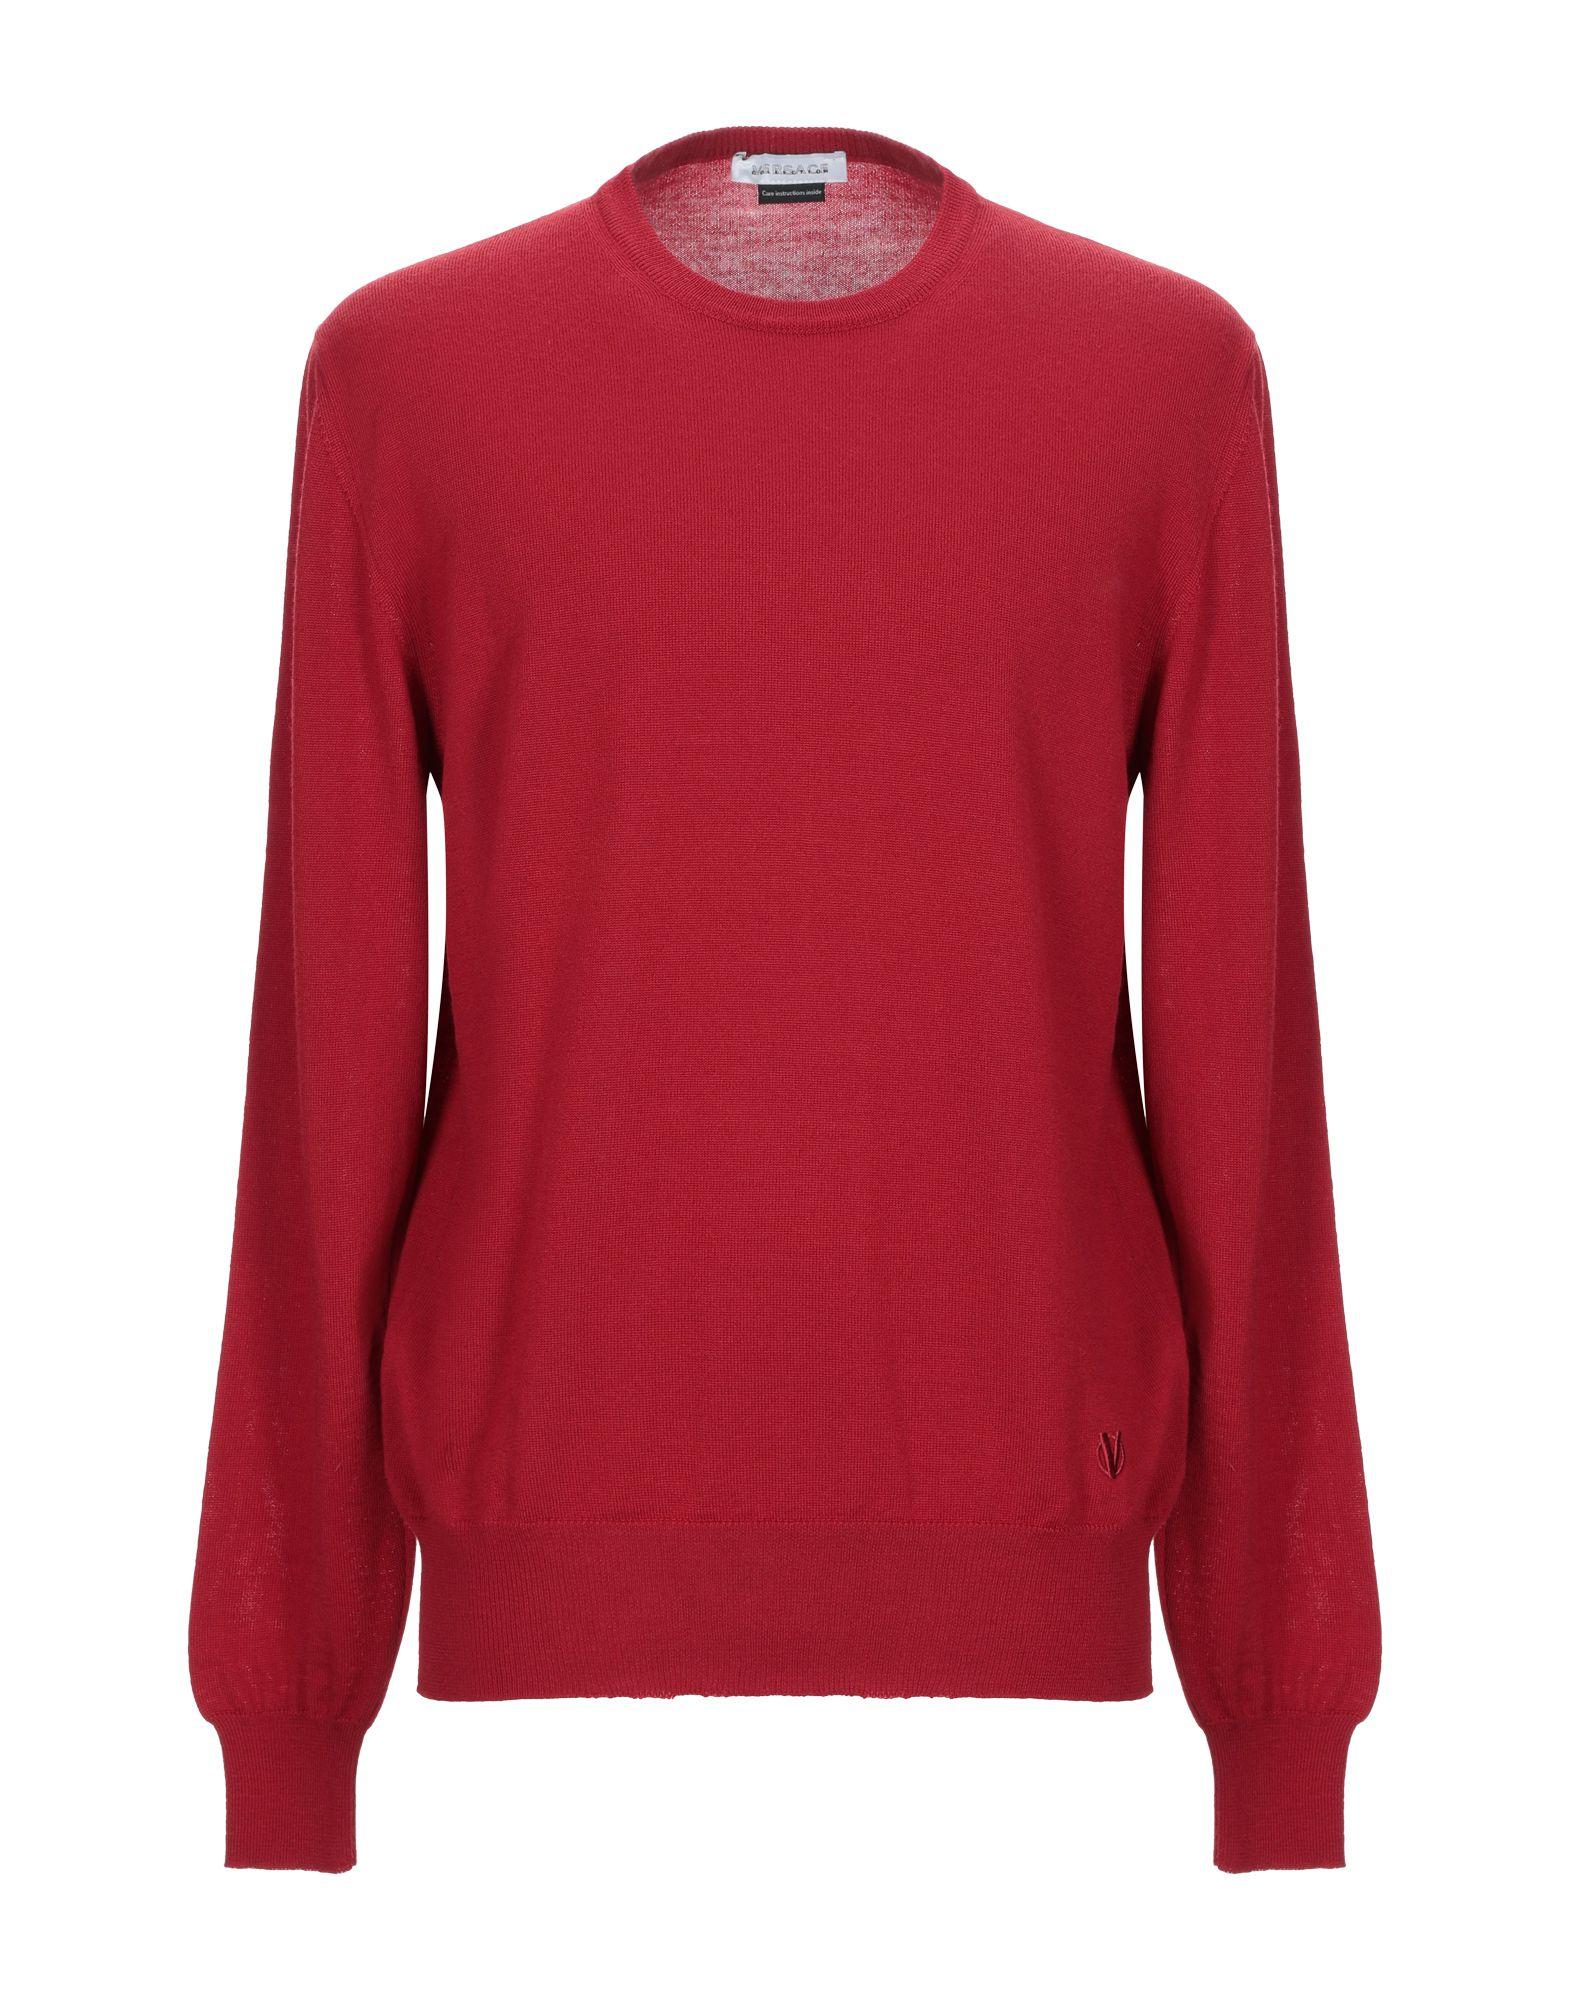 Versace Sweater in Red for Men - Lyst